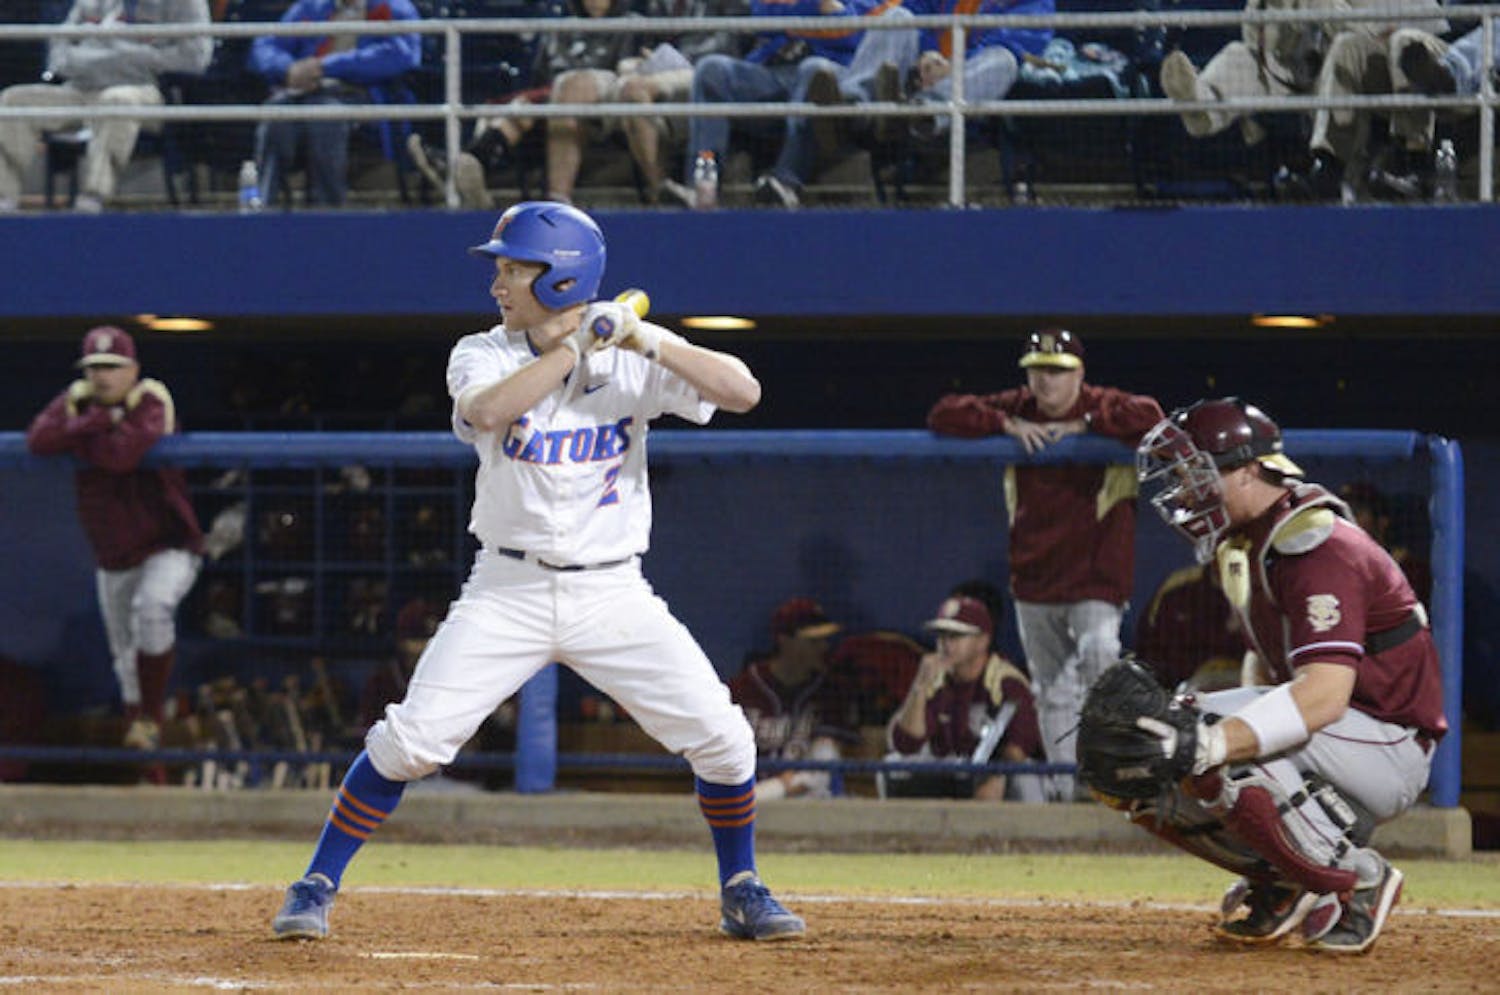 Casey Turgeon bats against Florida State during Florida’s 4-1 loss on Mar. 12, 2013, at McKethan Stadium. Turgeon and the Gators open their season at home on Friday against Maryland at 7 p.m.